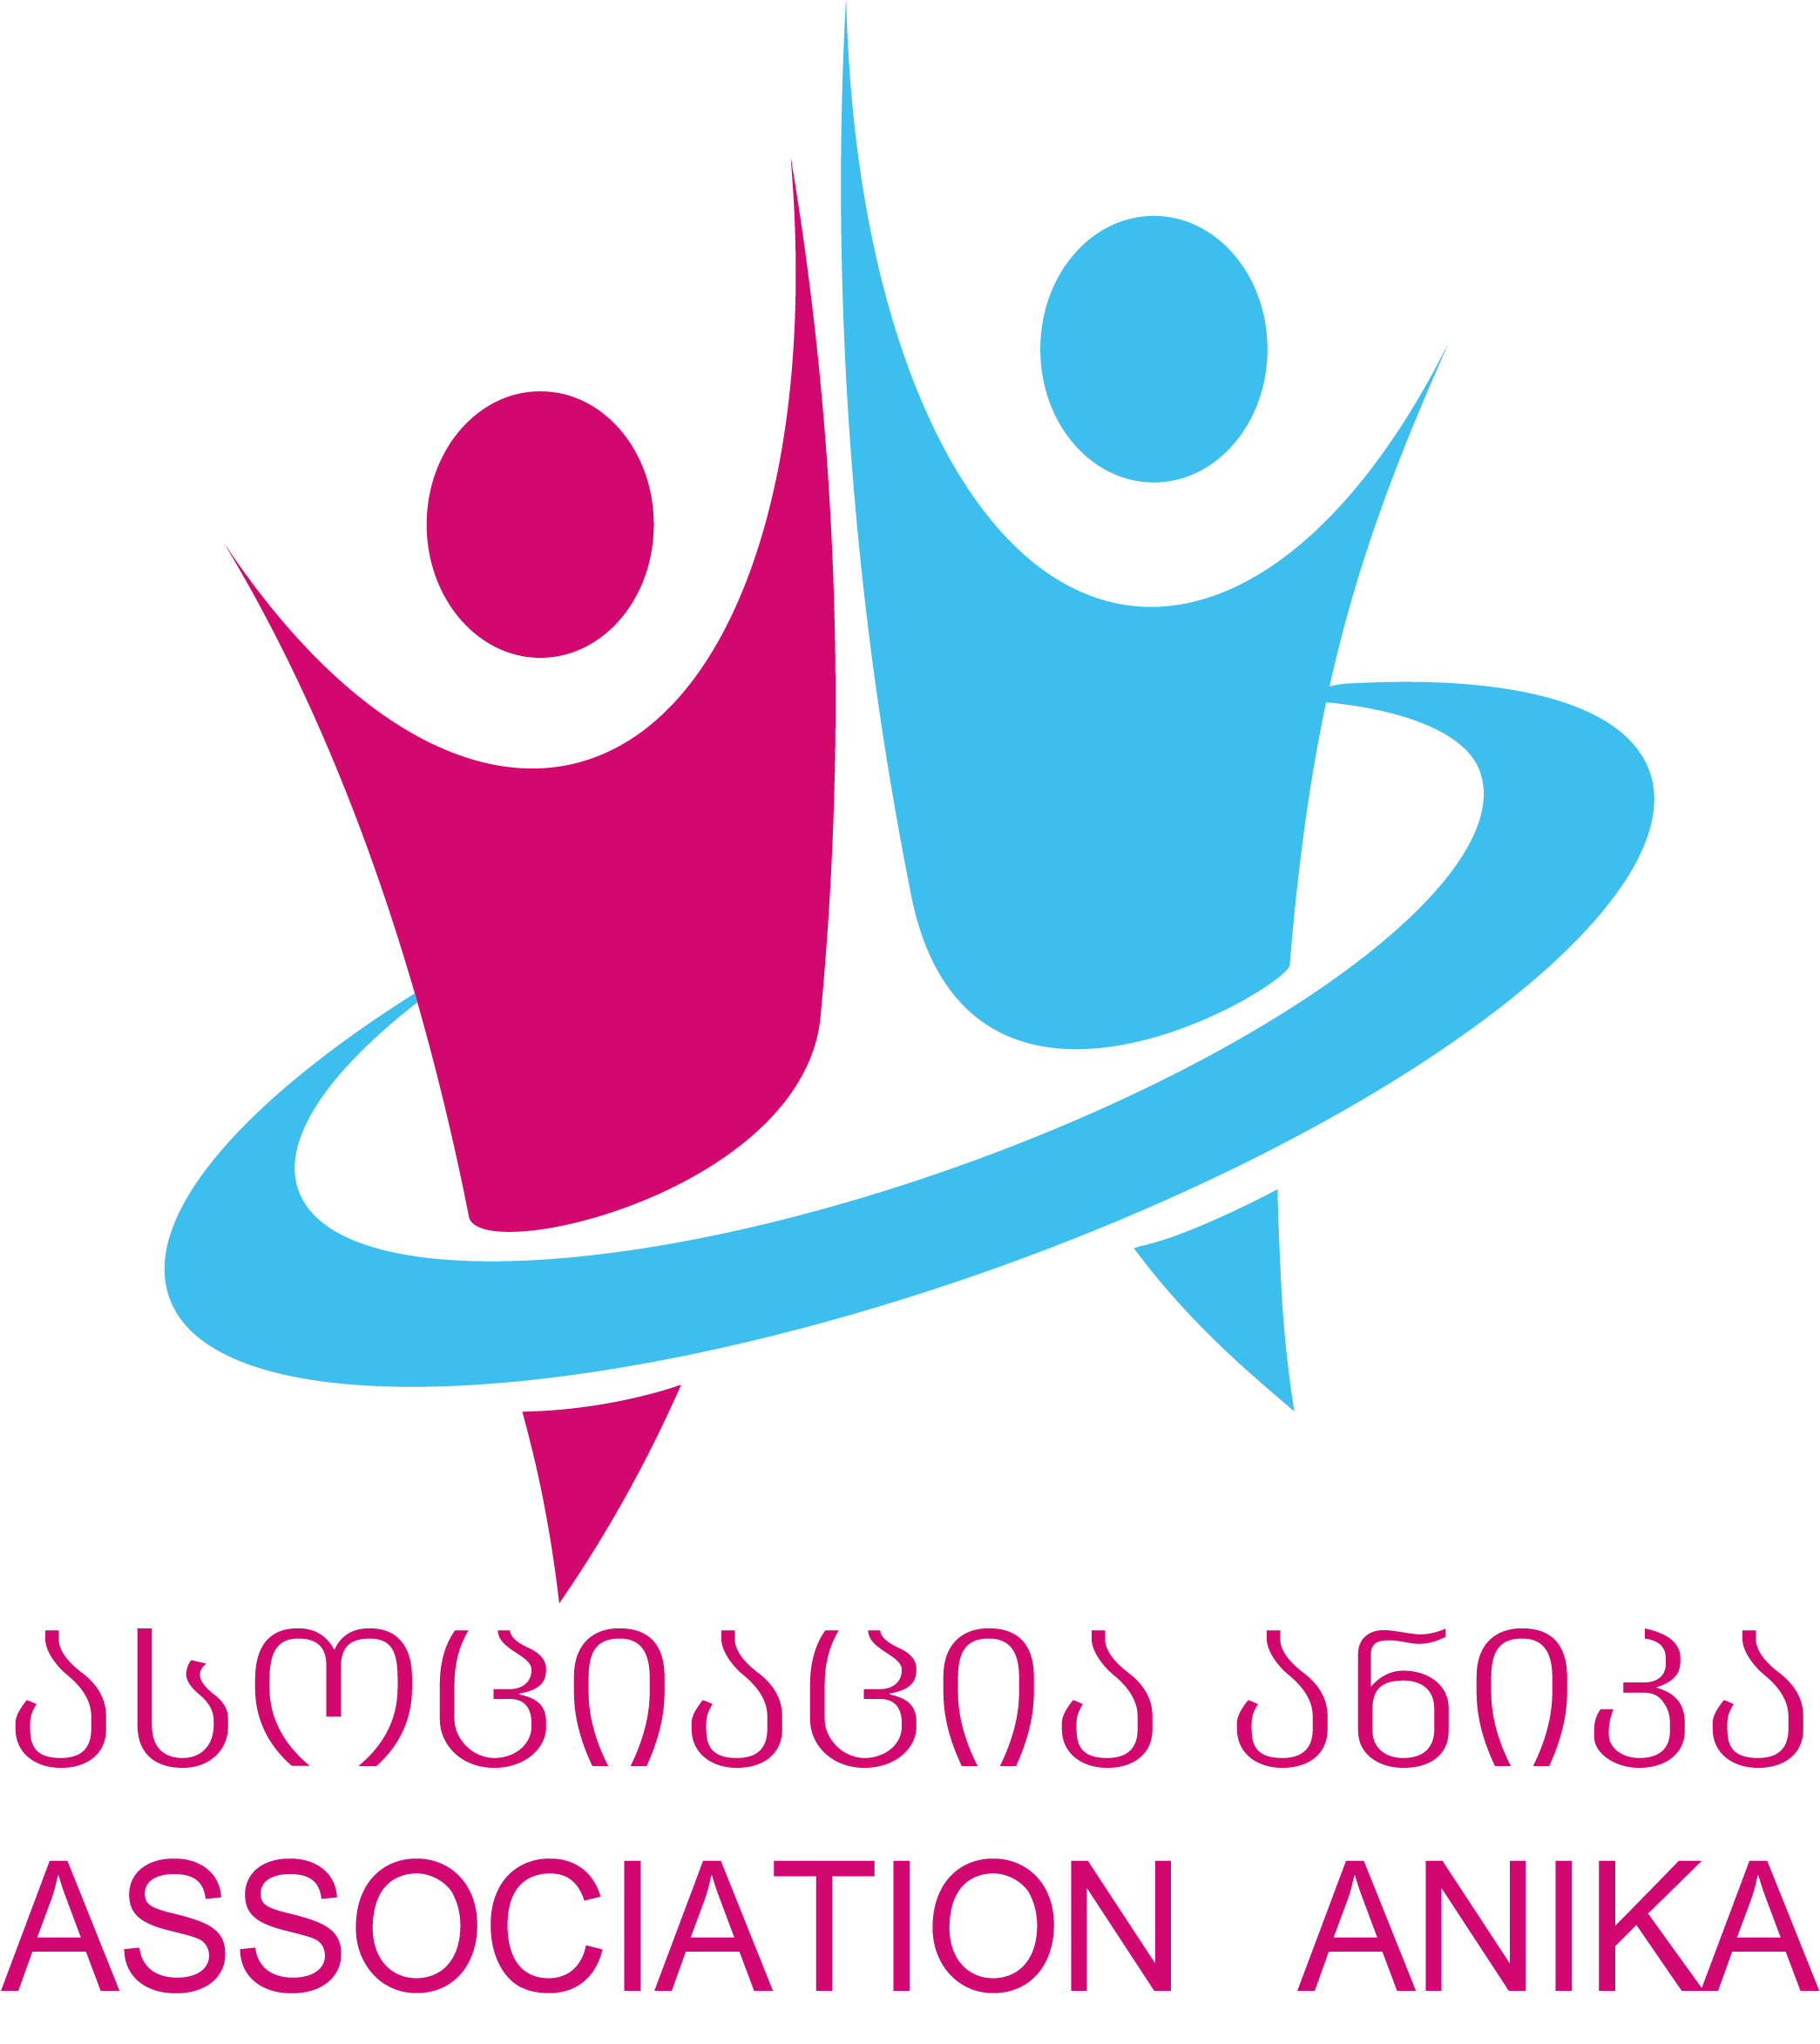 Association Anika logo. Two abstract figures, one in pink and one in blue, high-fiving as a blue swooping ring envelopes them at the waist.